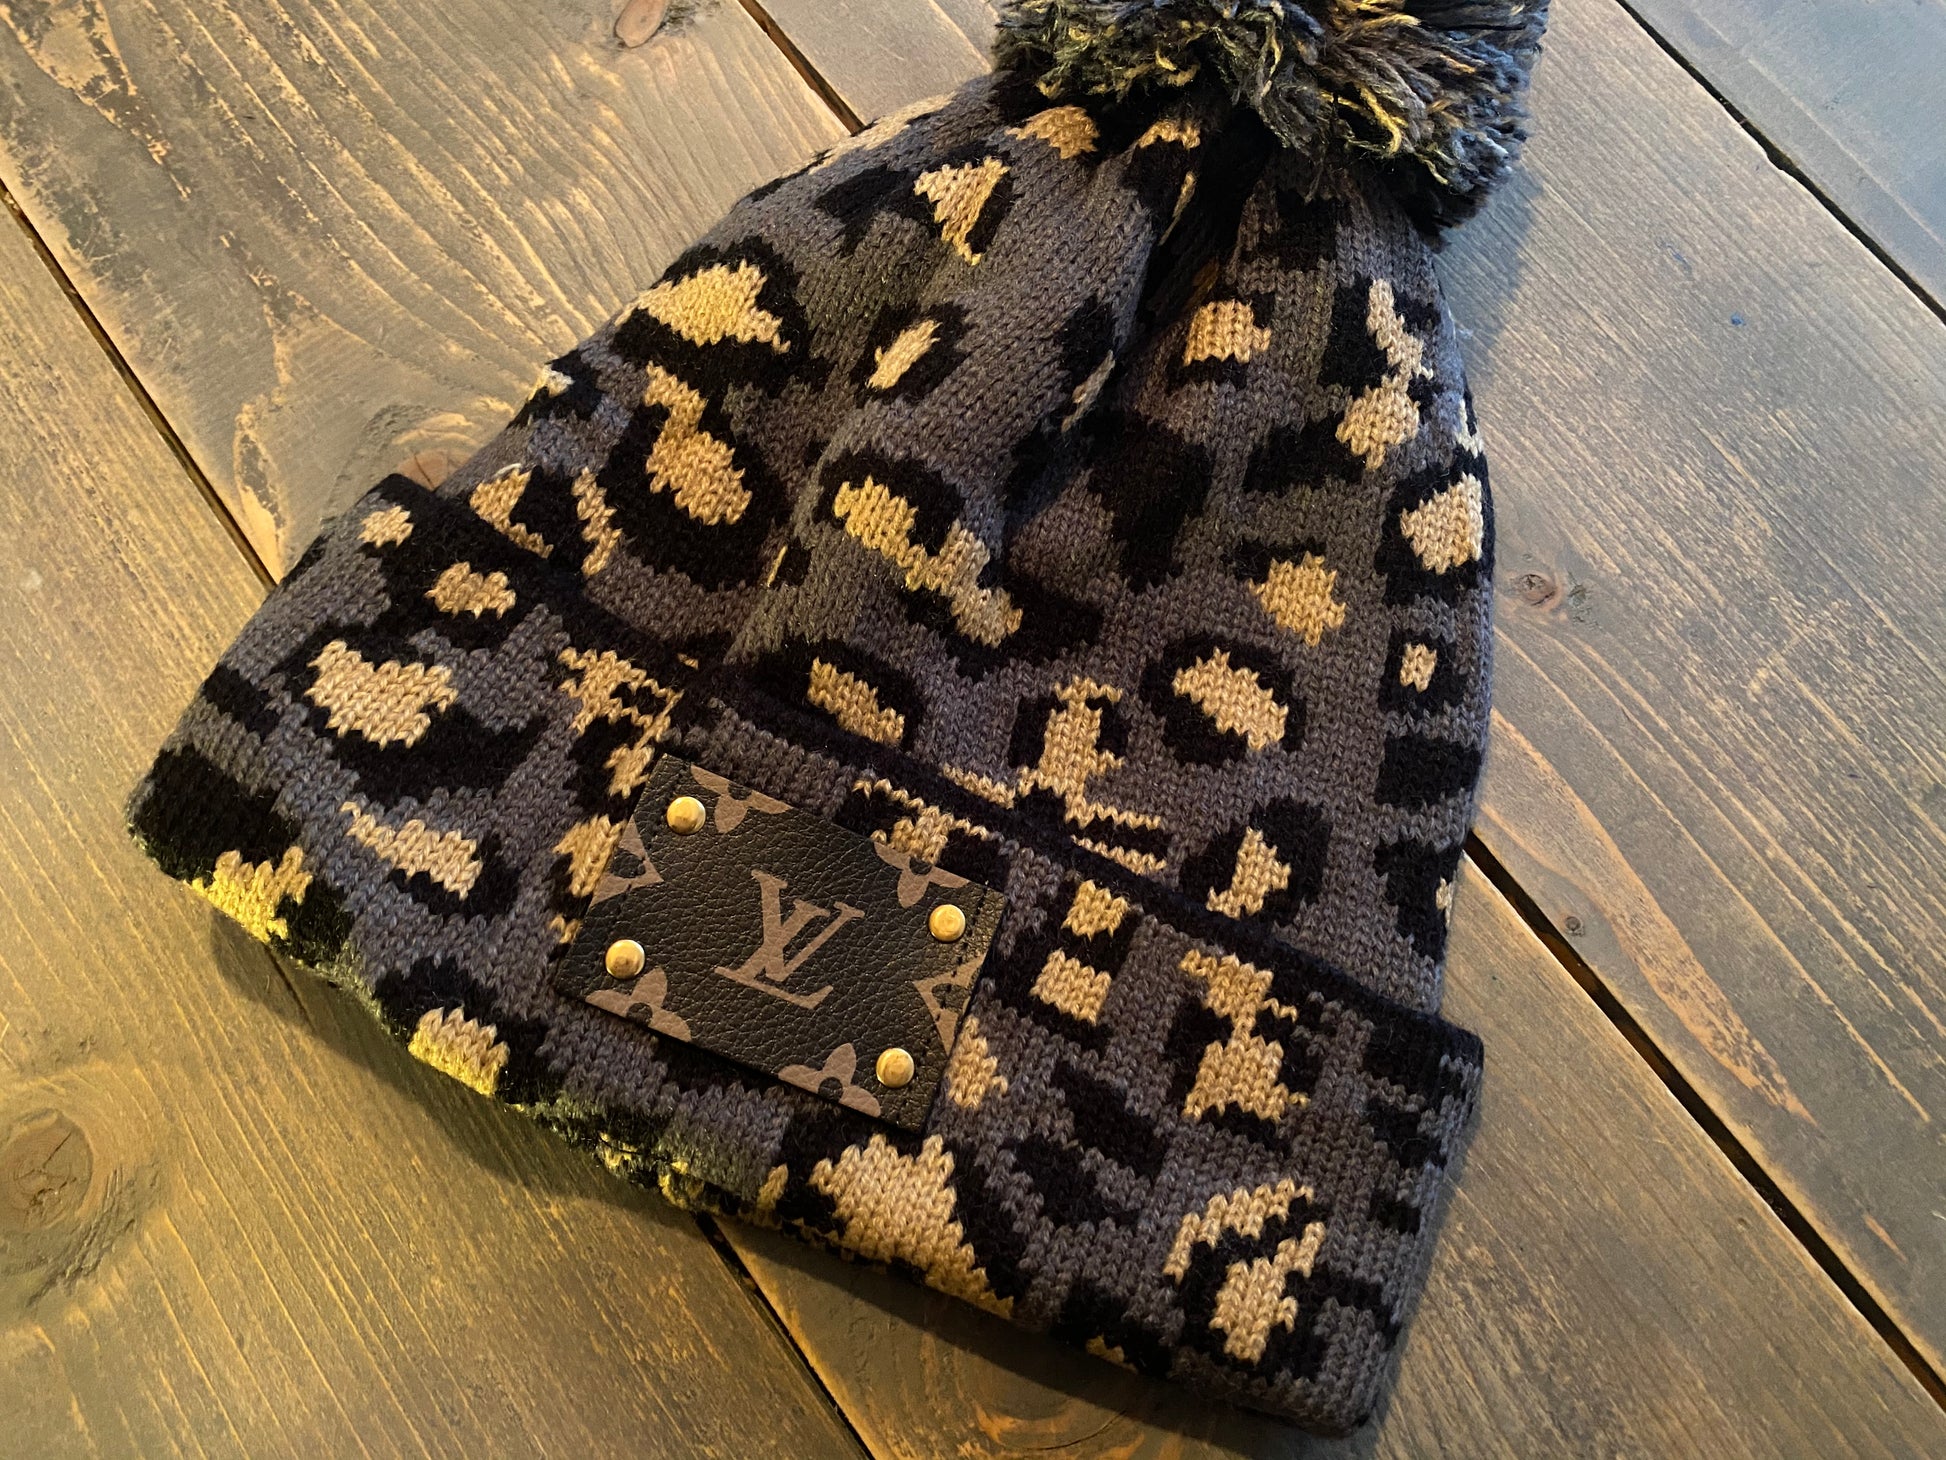 LV Patch Beanie  The Pretty Thistle Boutique